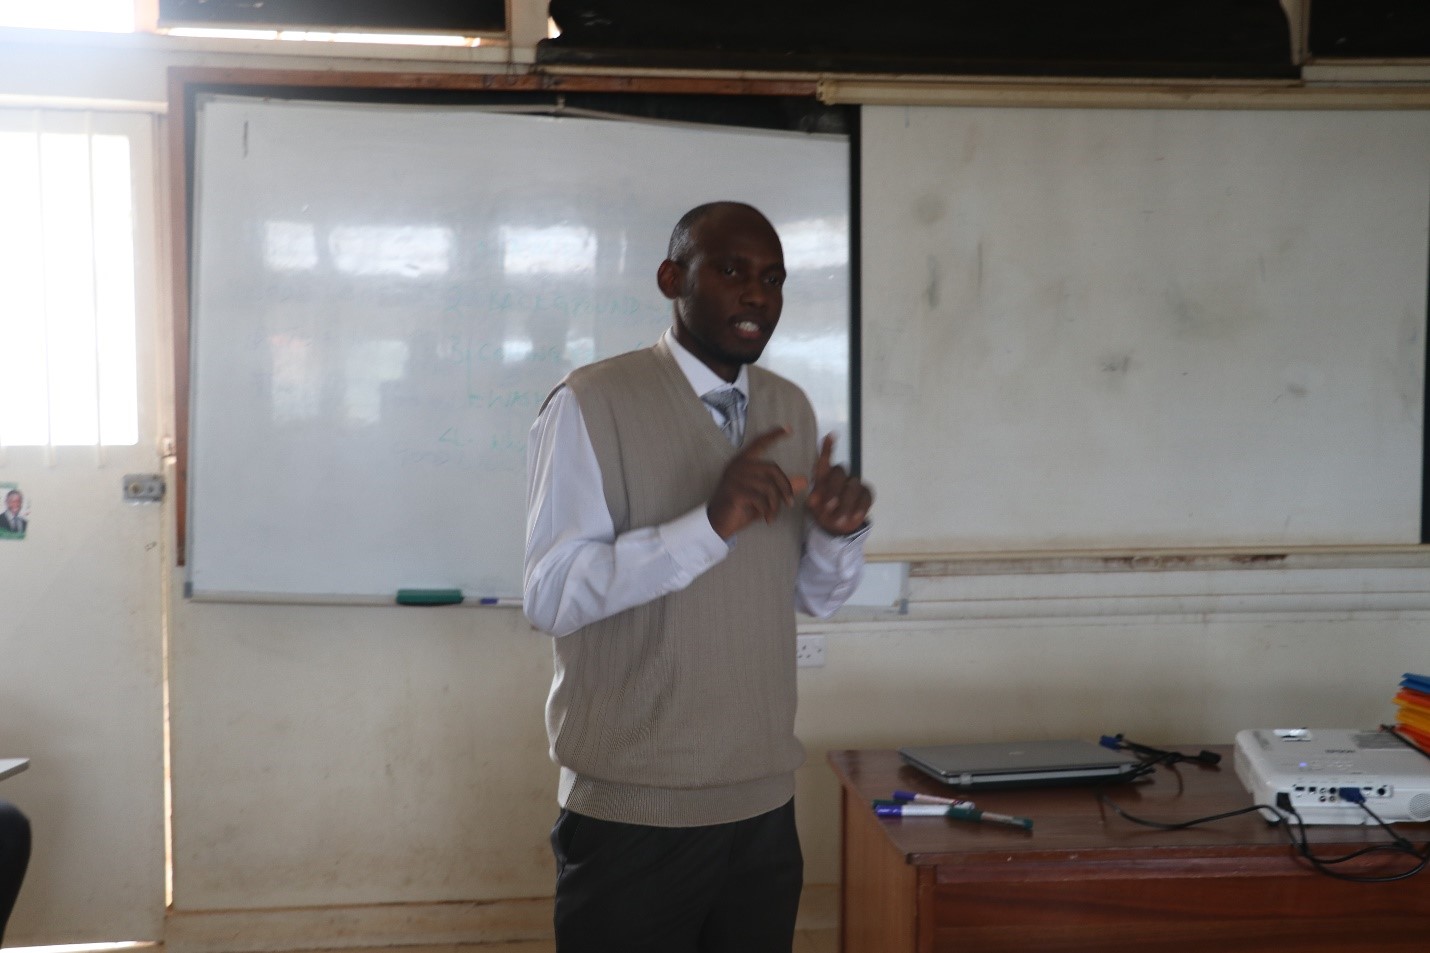 Dr. David Musoke, one of the Course Coordinators speaking at the launch. He explained what the 8 weeks of the course duration will cover.